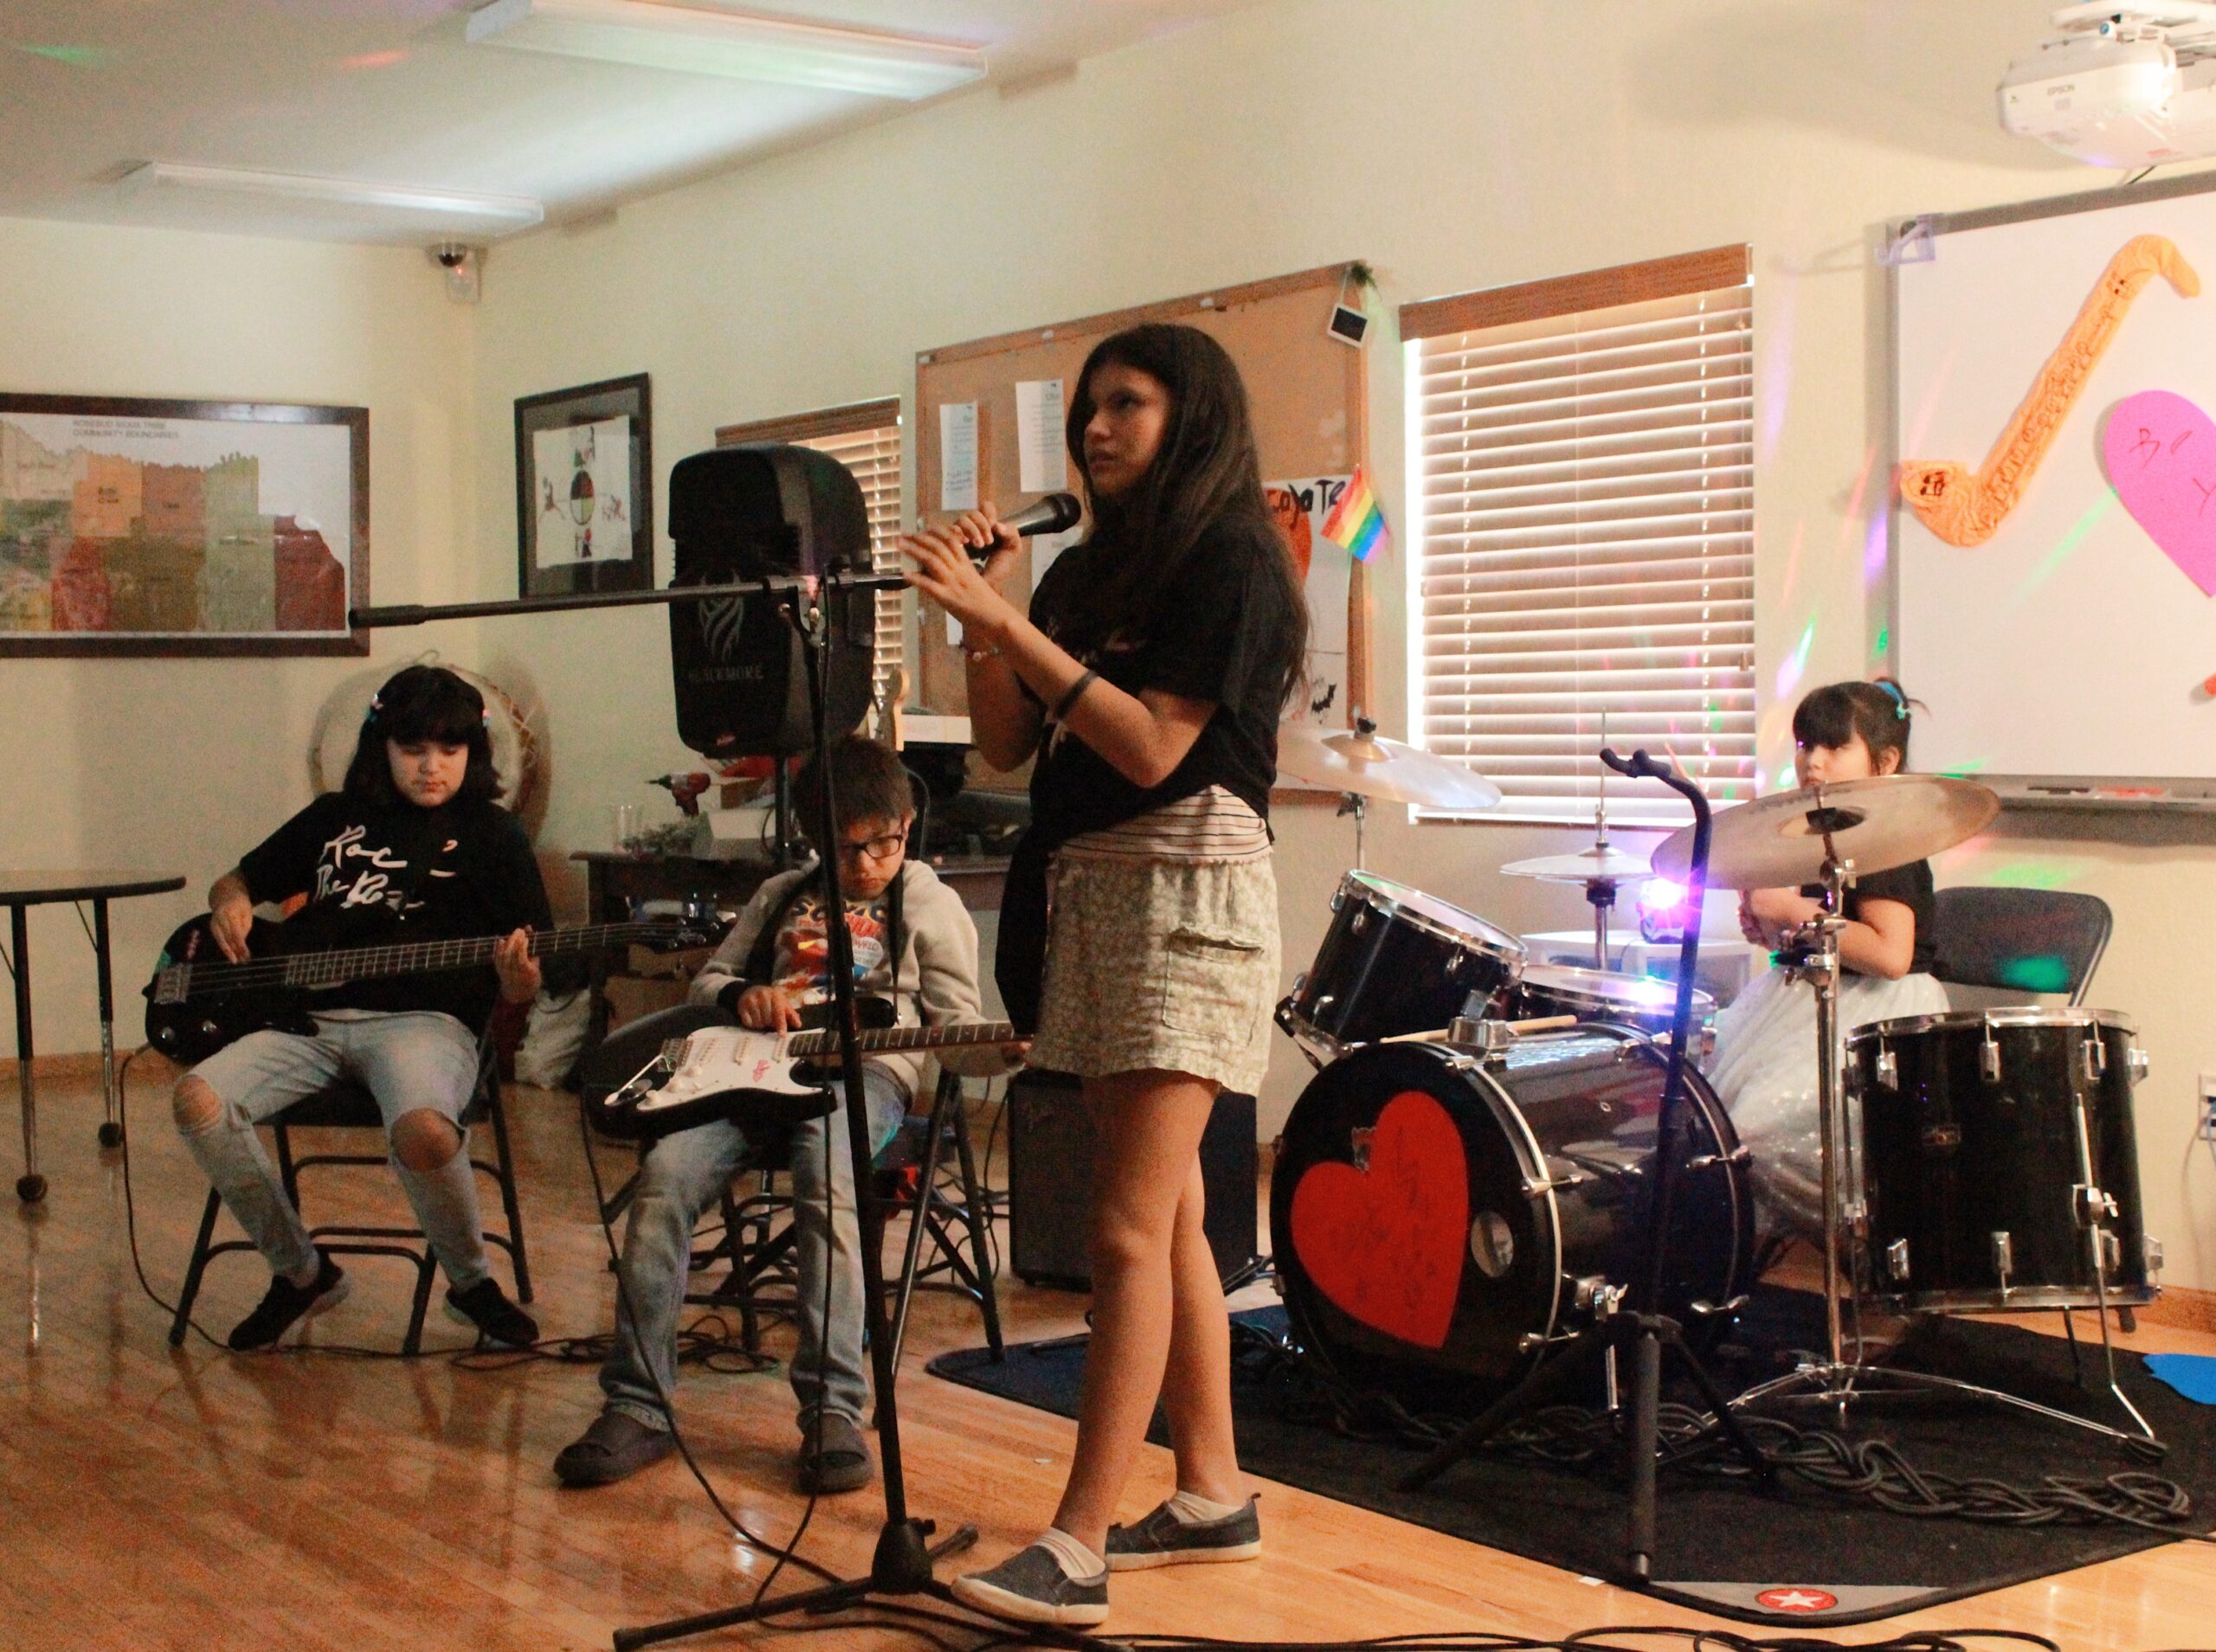 Four young people perform as musical band. One sings into a microphone, while the other three play the bass guitar, electric guitar, and drums.